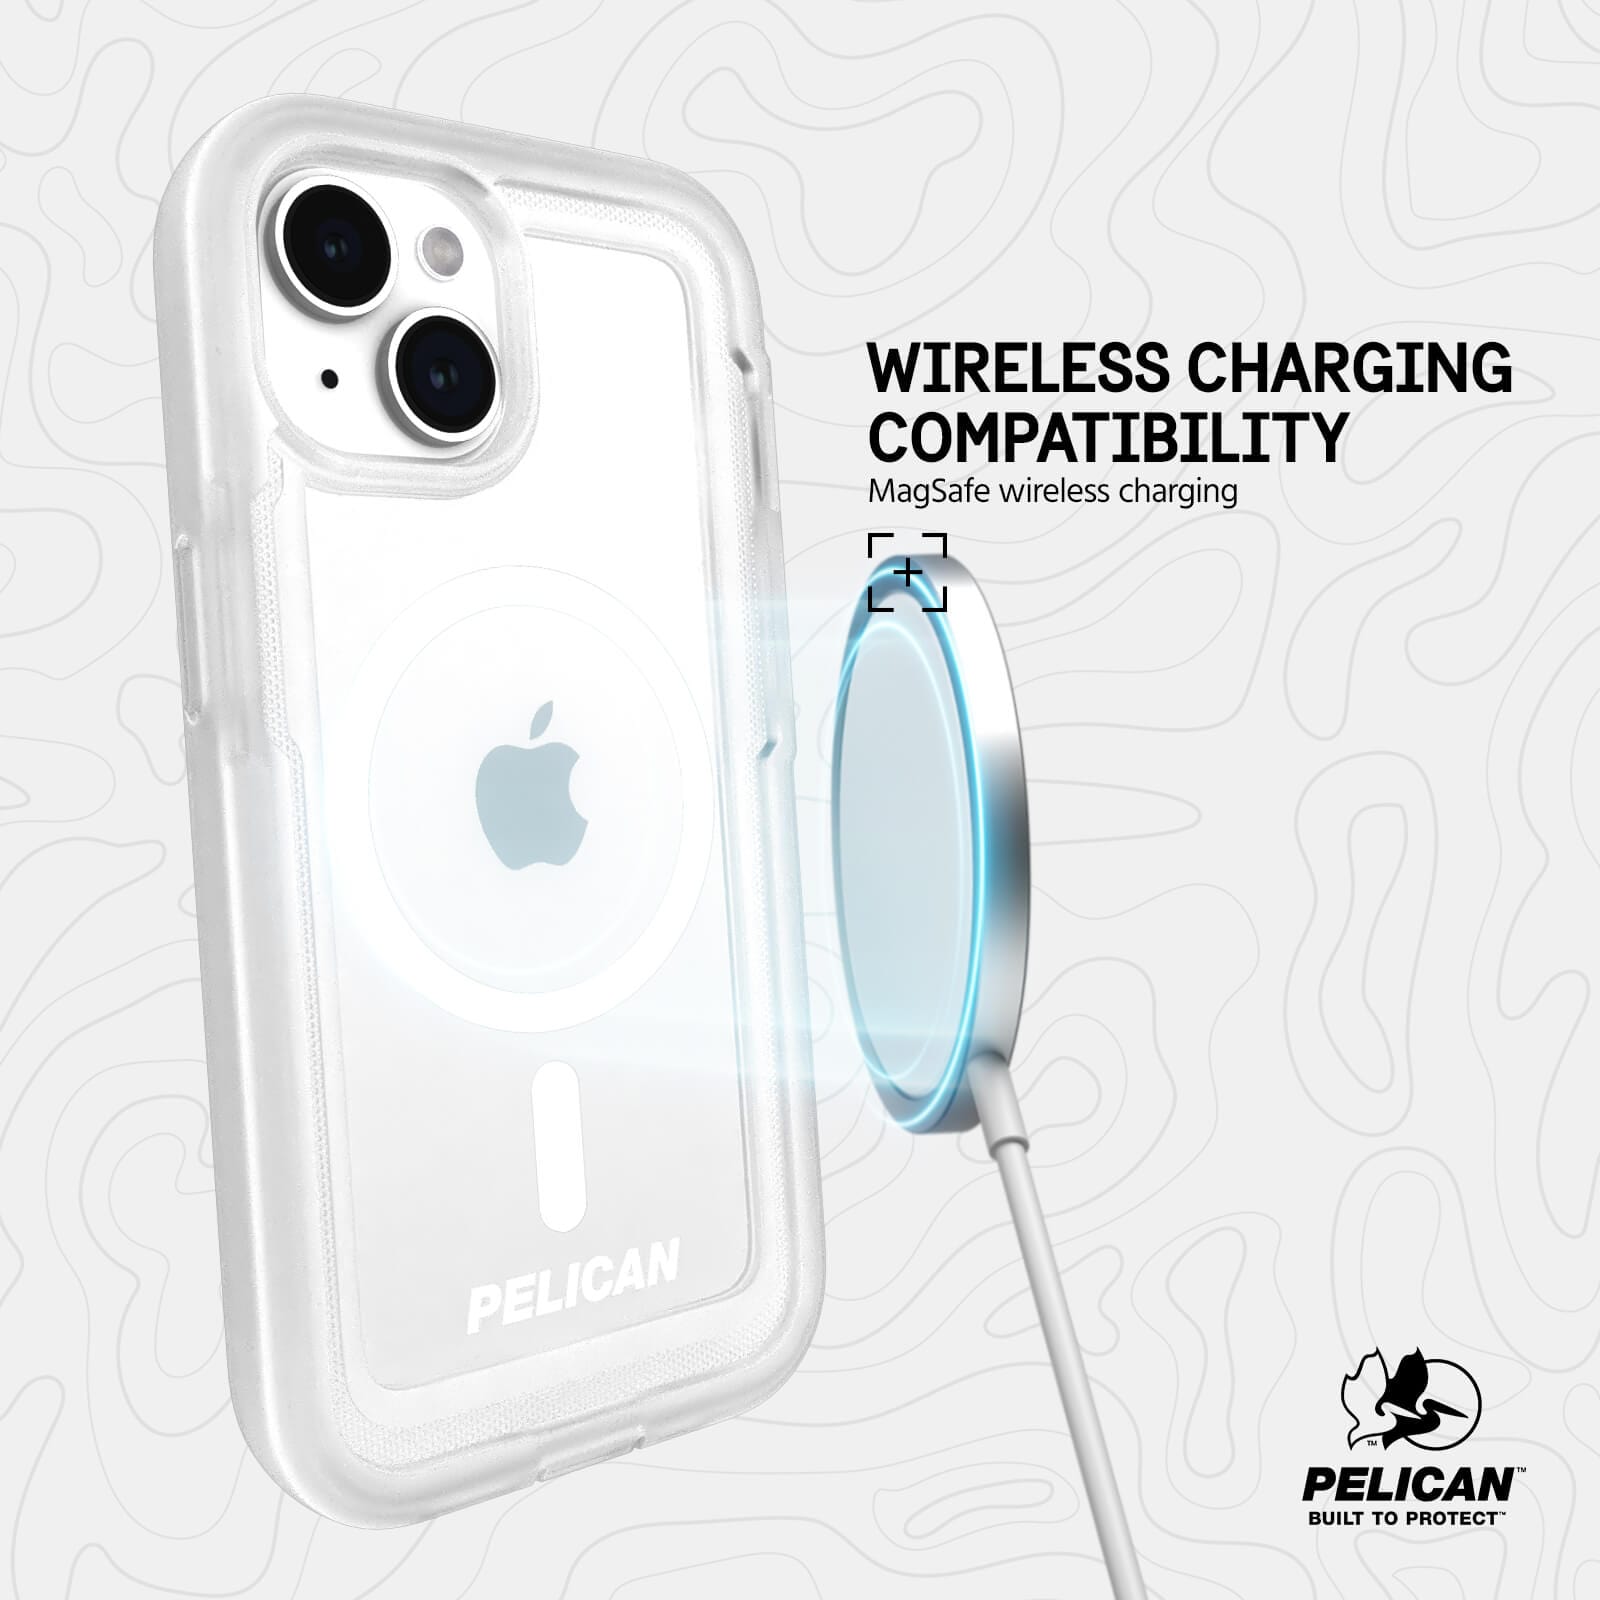 WIRELESS CHARGING COMPATIBILITY. MAGSAFE WIRELESS CHARGING. 